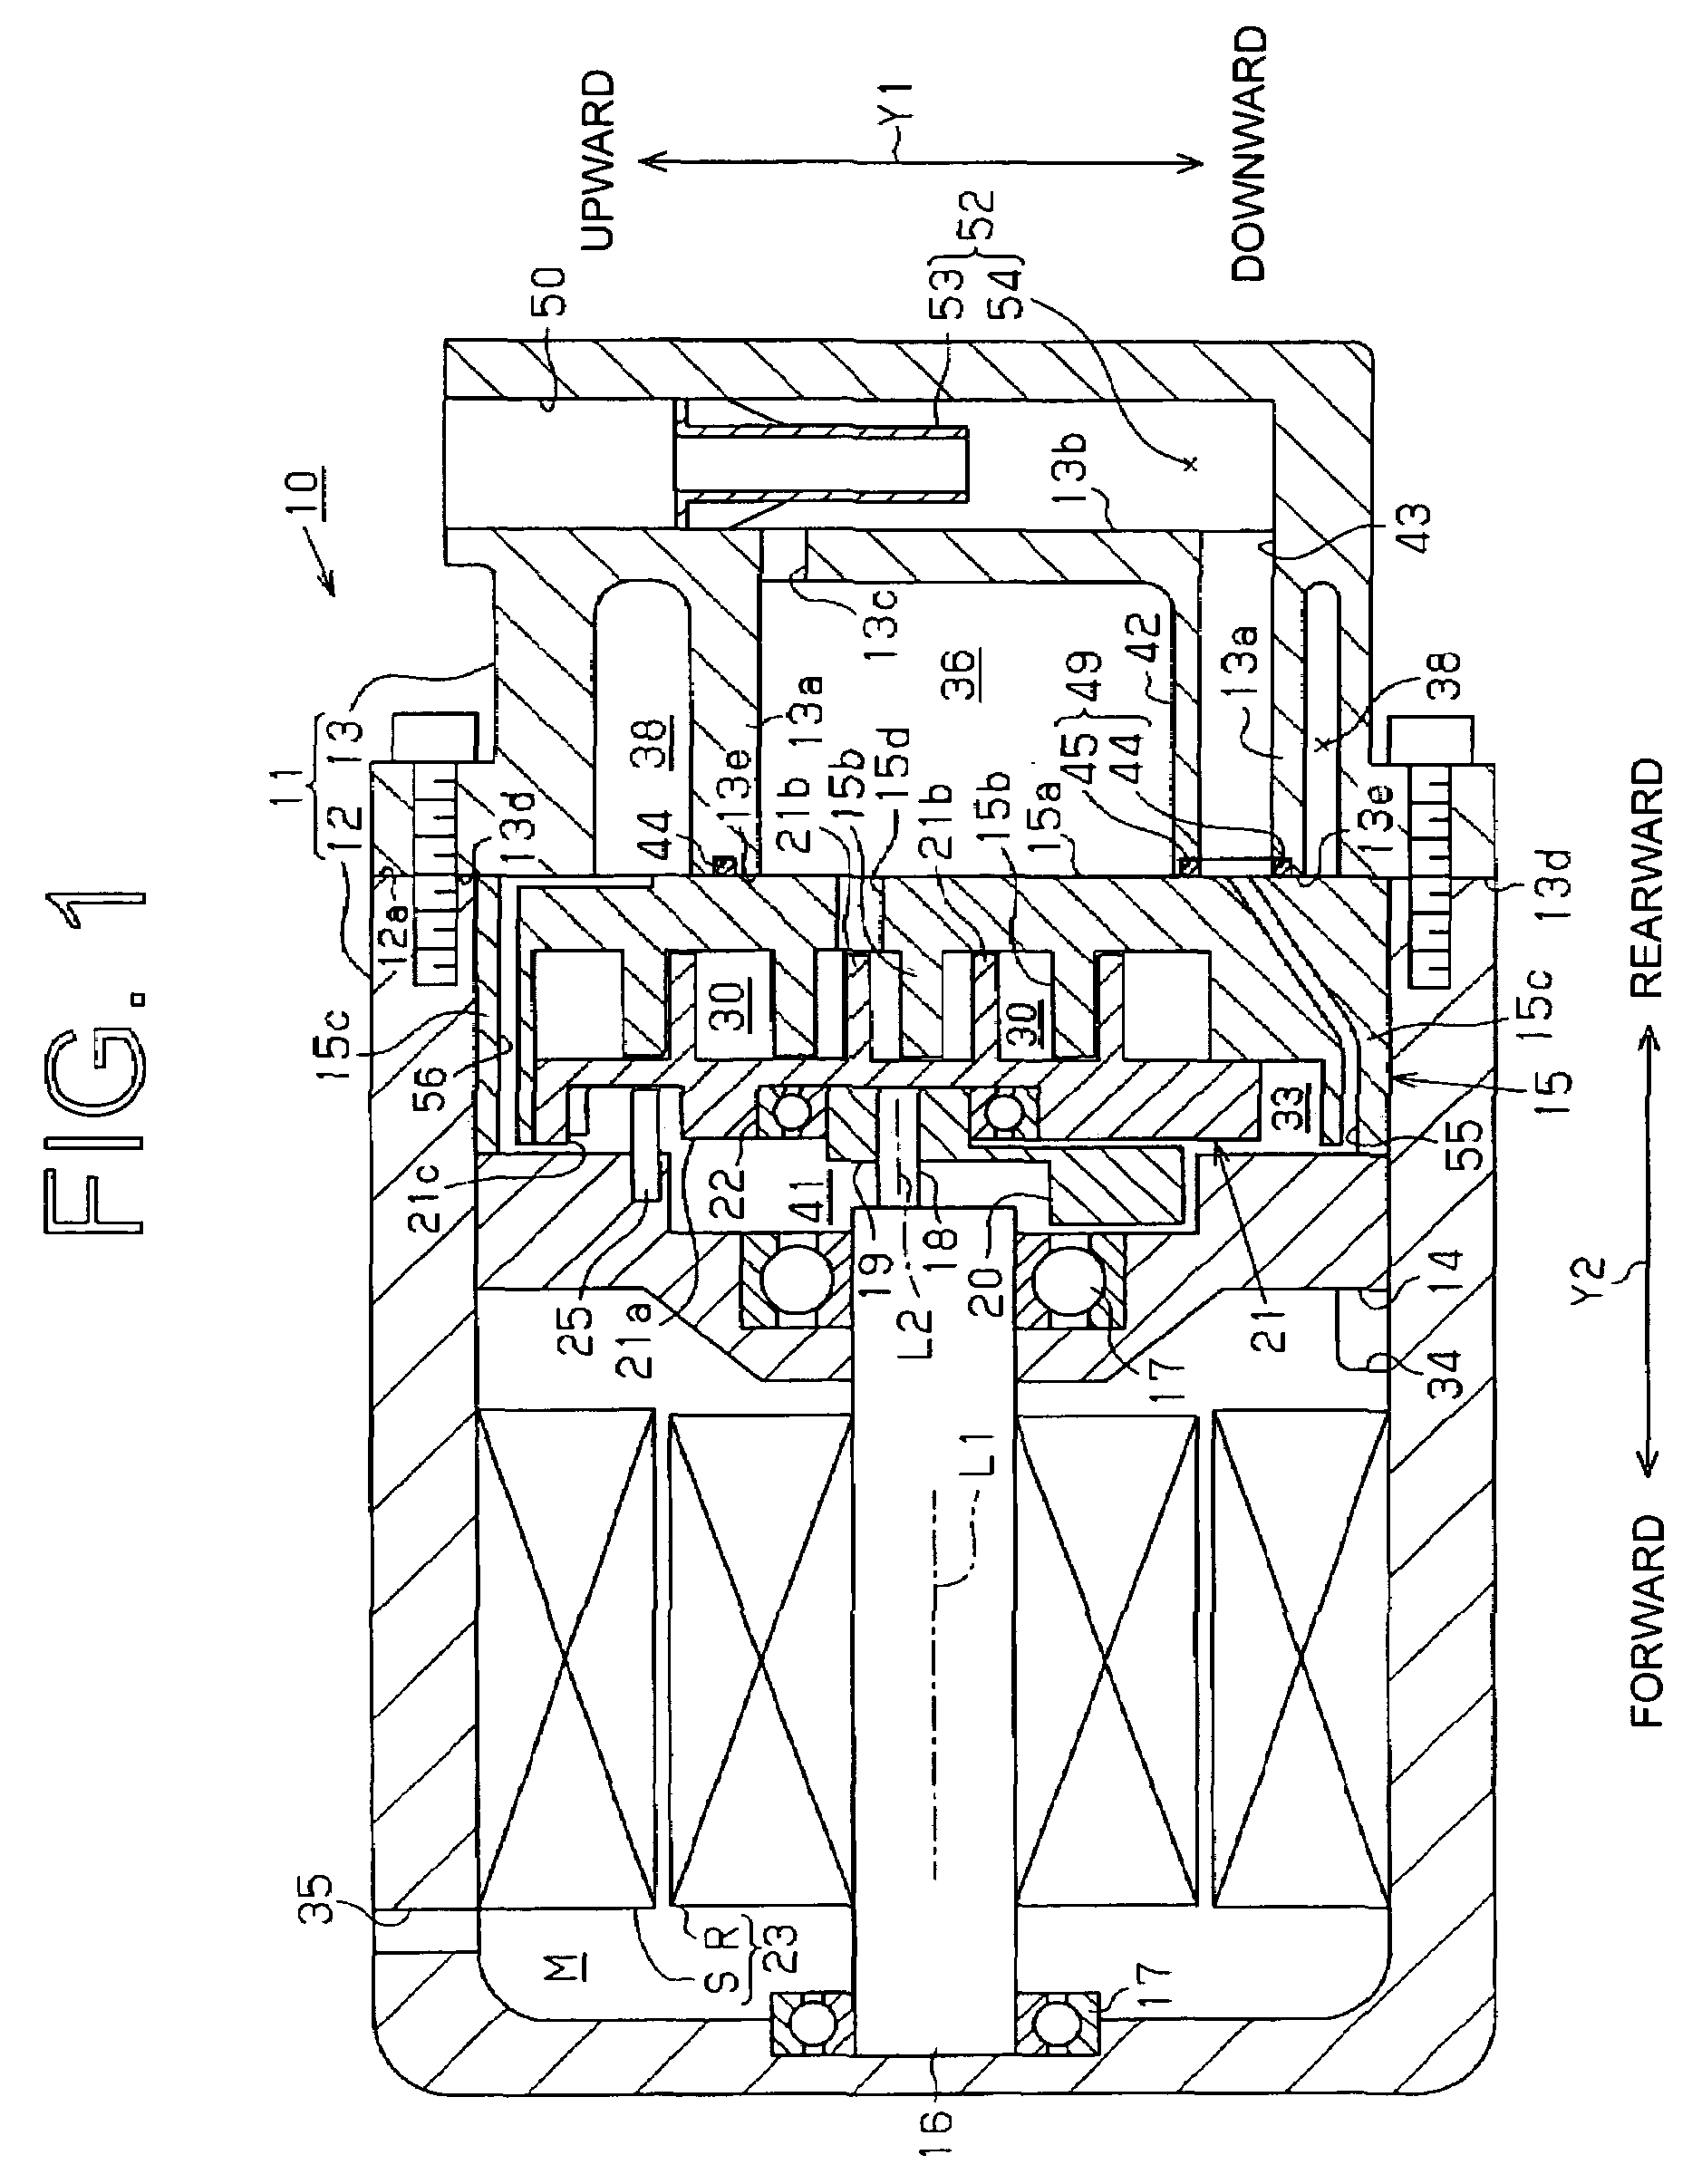 Scroll compressor having an oil reservoir surrounding the discharge chamber and an oil separator in the rear housing